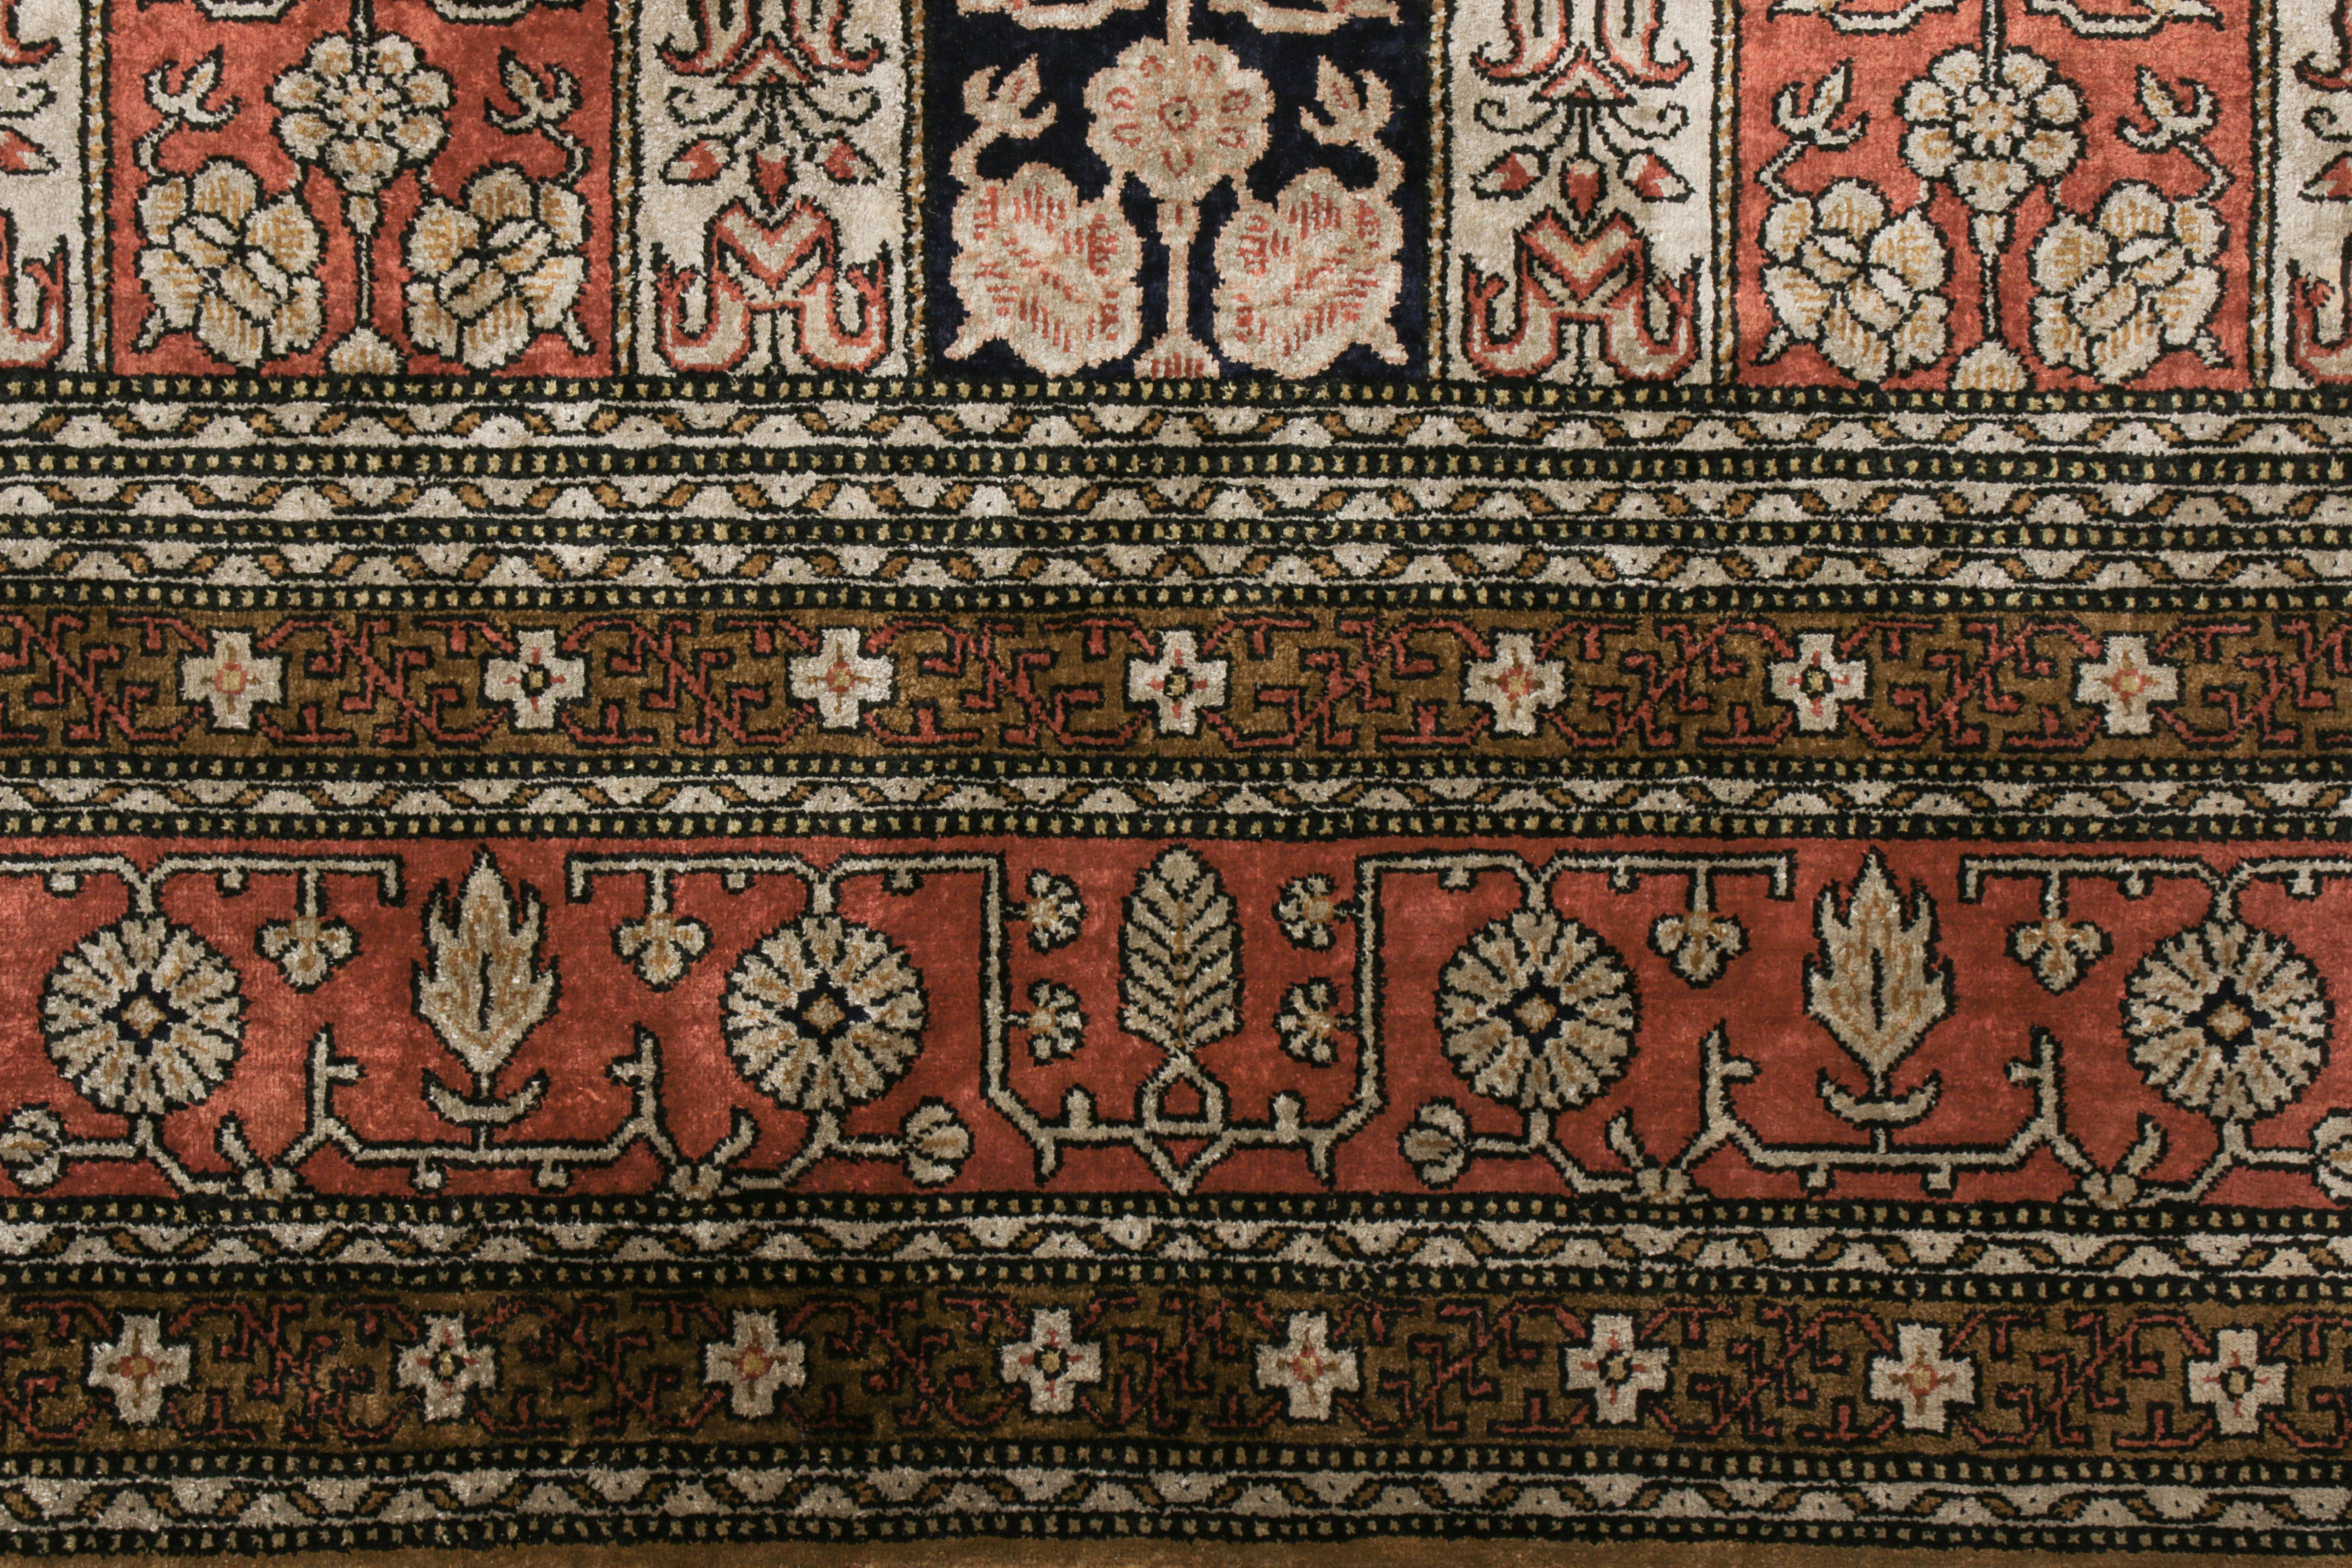 Vintage Persian Qum Rug Pair in Red & Beige-Brown Floral Pattern, by Rug & Kilim In Good Condition For Sale In Long Island City, NY